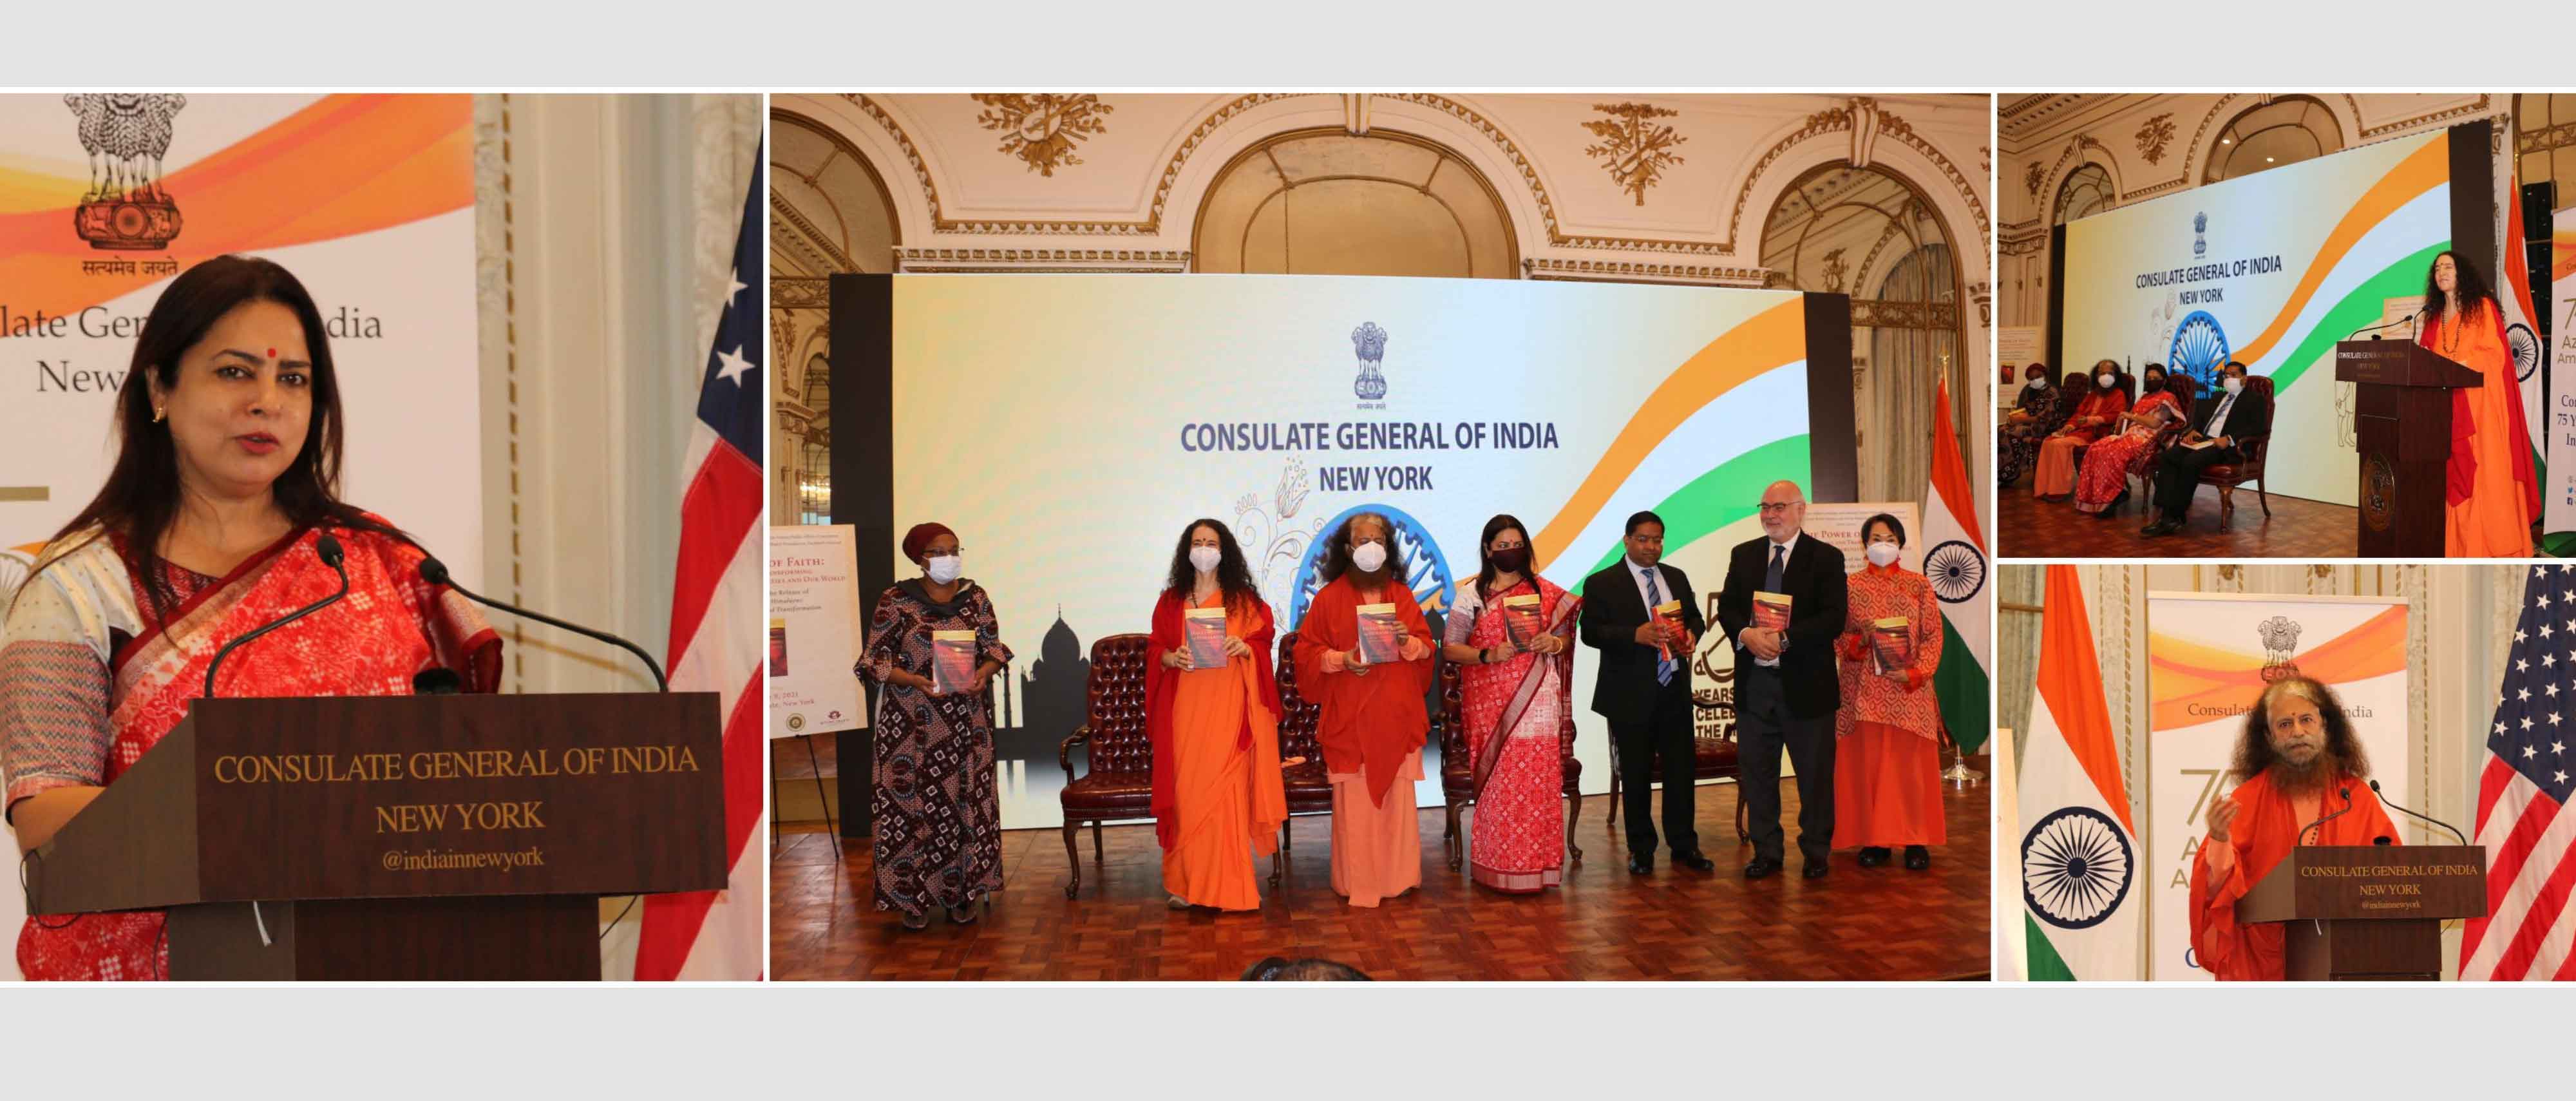  Hon'ble Minister of State for External Affairs & Culture Smt. Meenakashi Lekhi launched the book "From Hollywood to Himalayas" by Sadhvi Bhagawati Saraswati at the Consulate